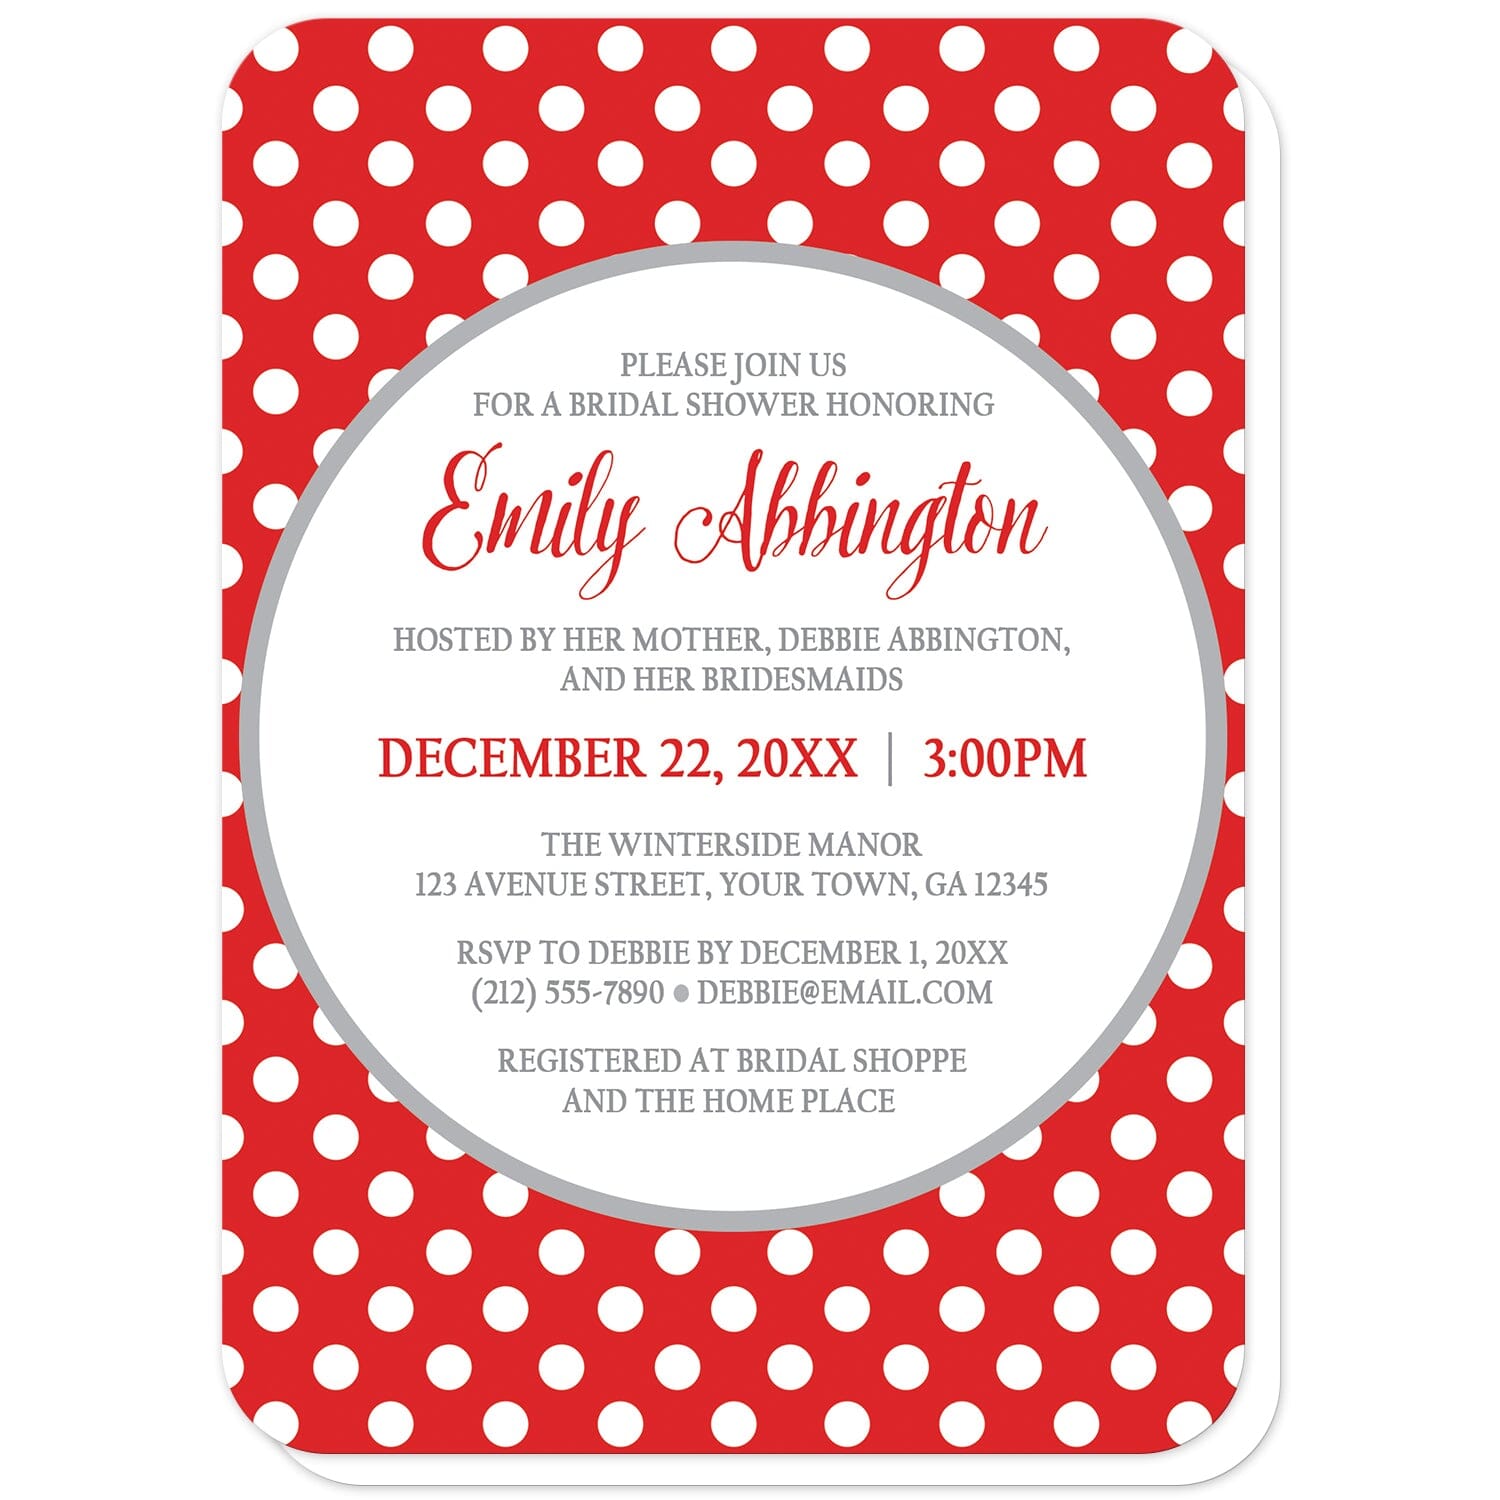 Gray and Red Polka Dot Bridal Shower Invitations (with rounded corners) at Artistically Invited. Gray and red polka dot bridal shower invitations with your personalized celebration details custom printed in red and gray inside a white circle outlined in light gray, over a red polka dot pattern with white polka dots over red. 